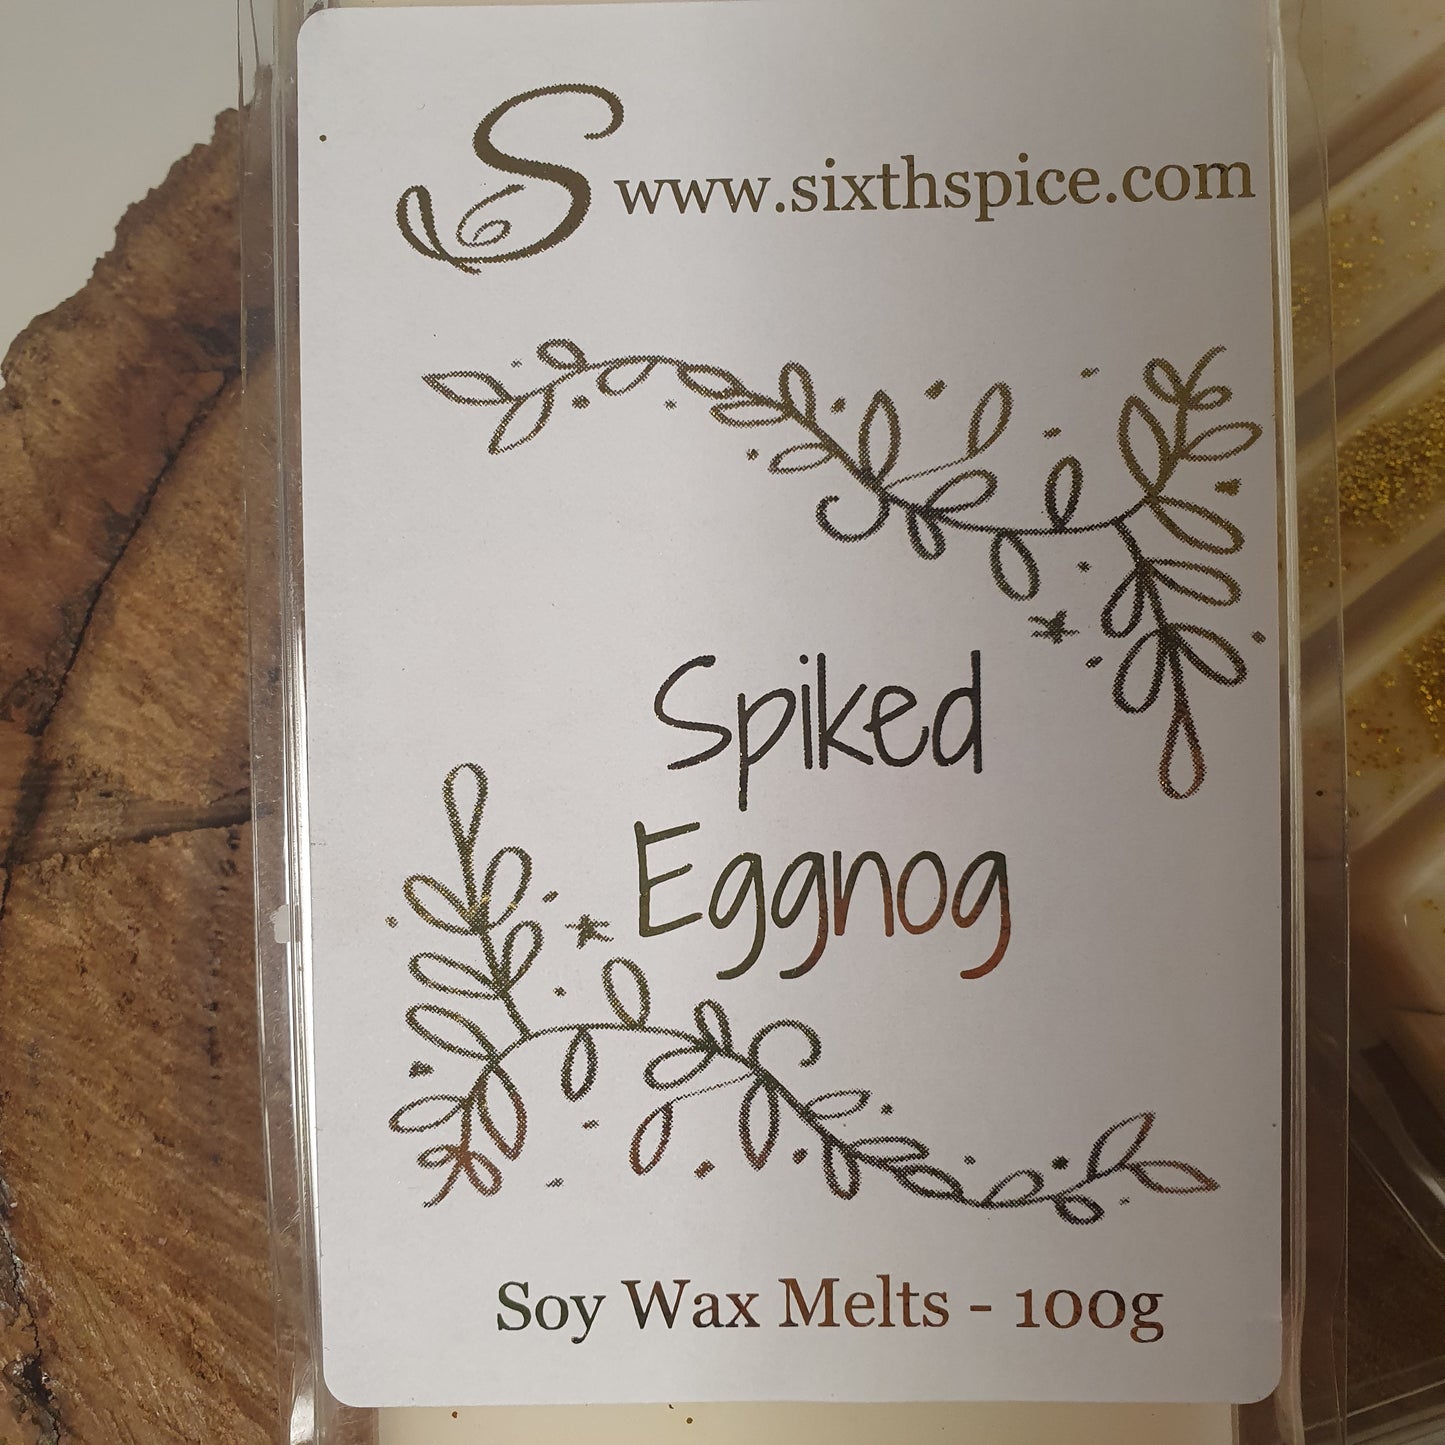 Spiked Eggnog - Soy Wax Melts